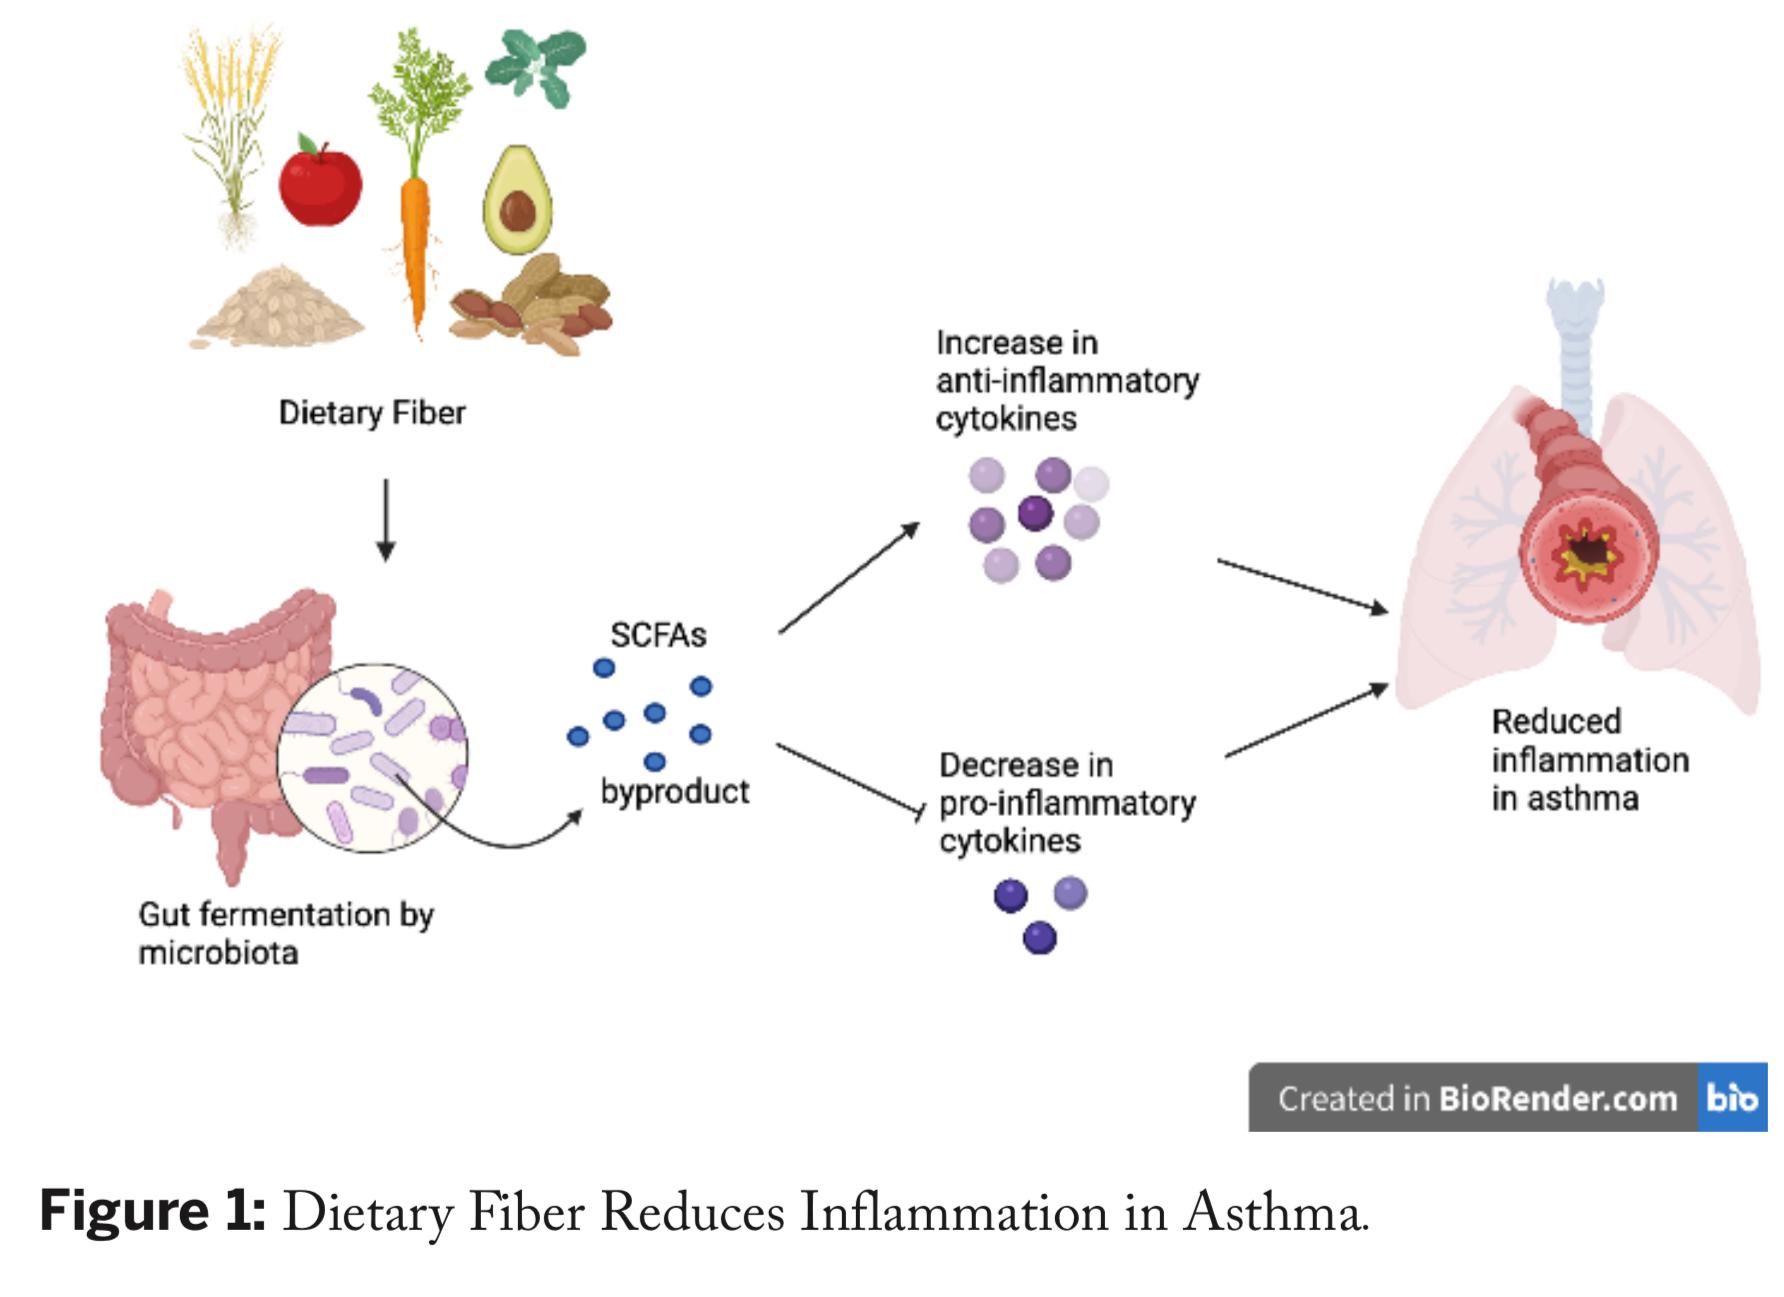 Review Paper: The Effects of Dietary Fiber on Asthma through Cytokine Production